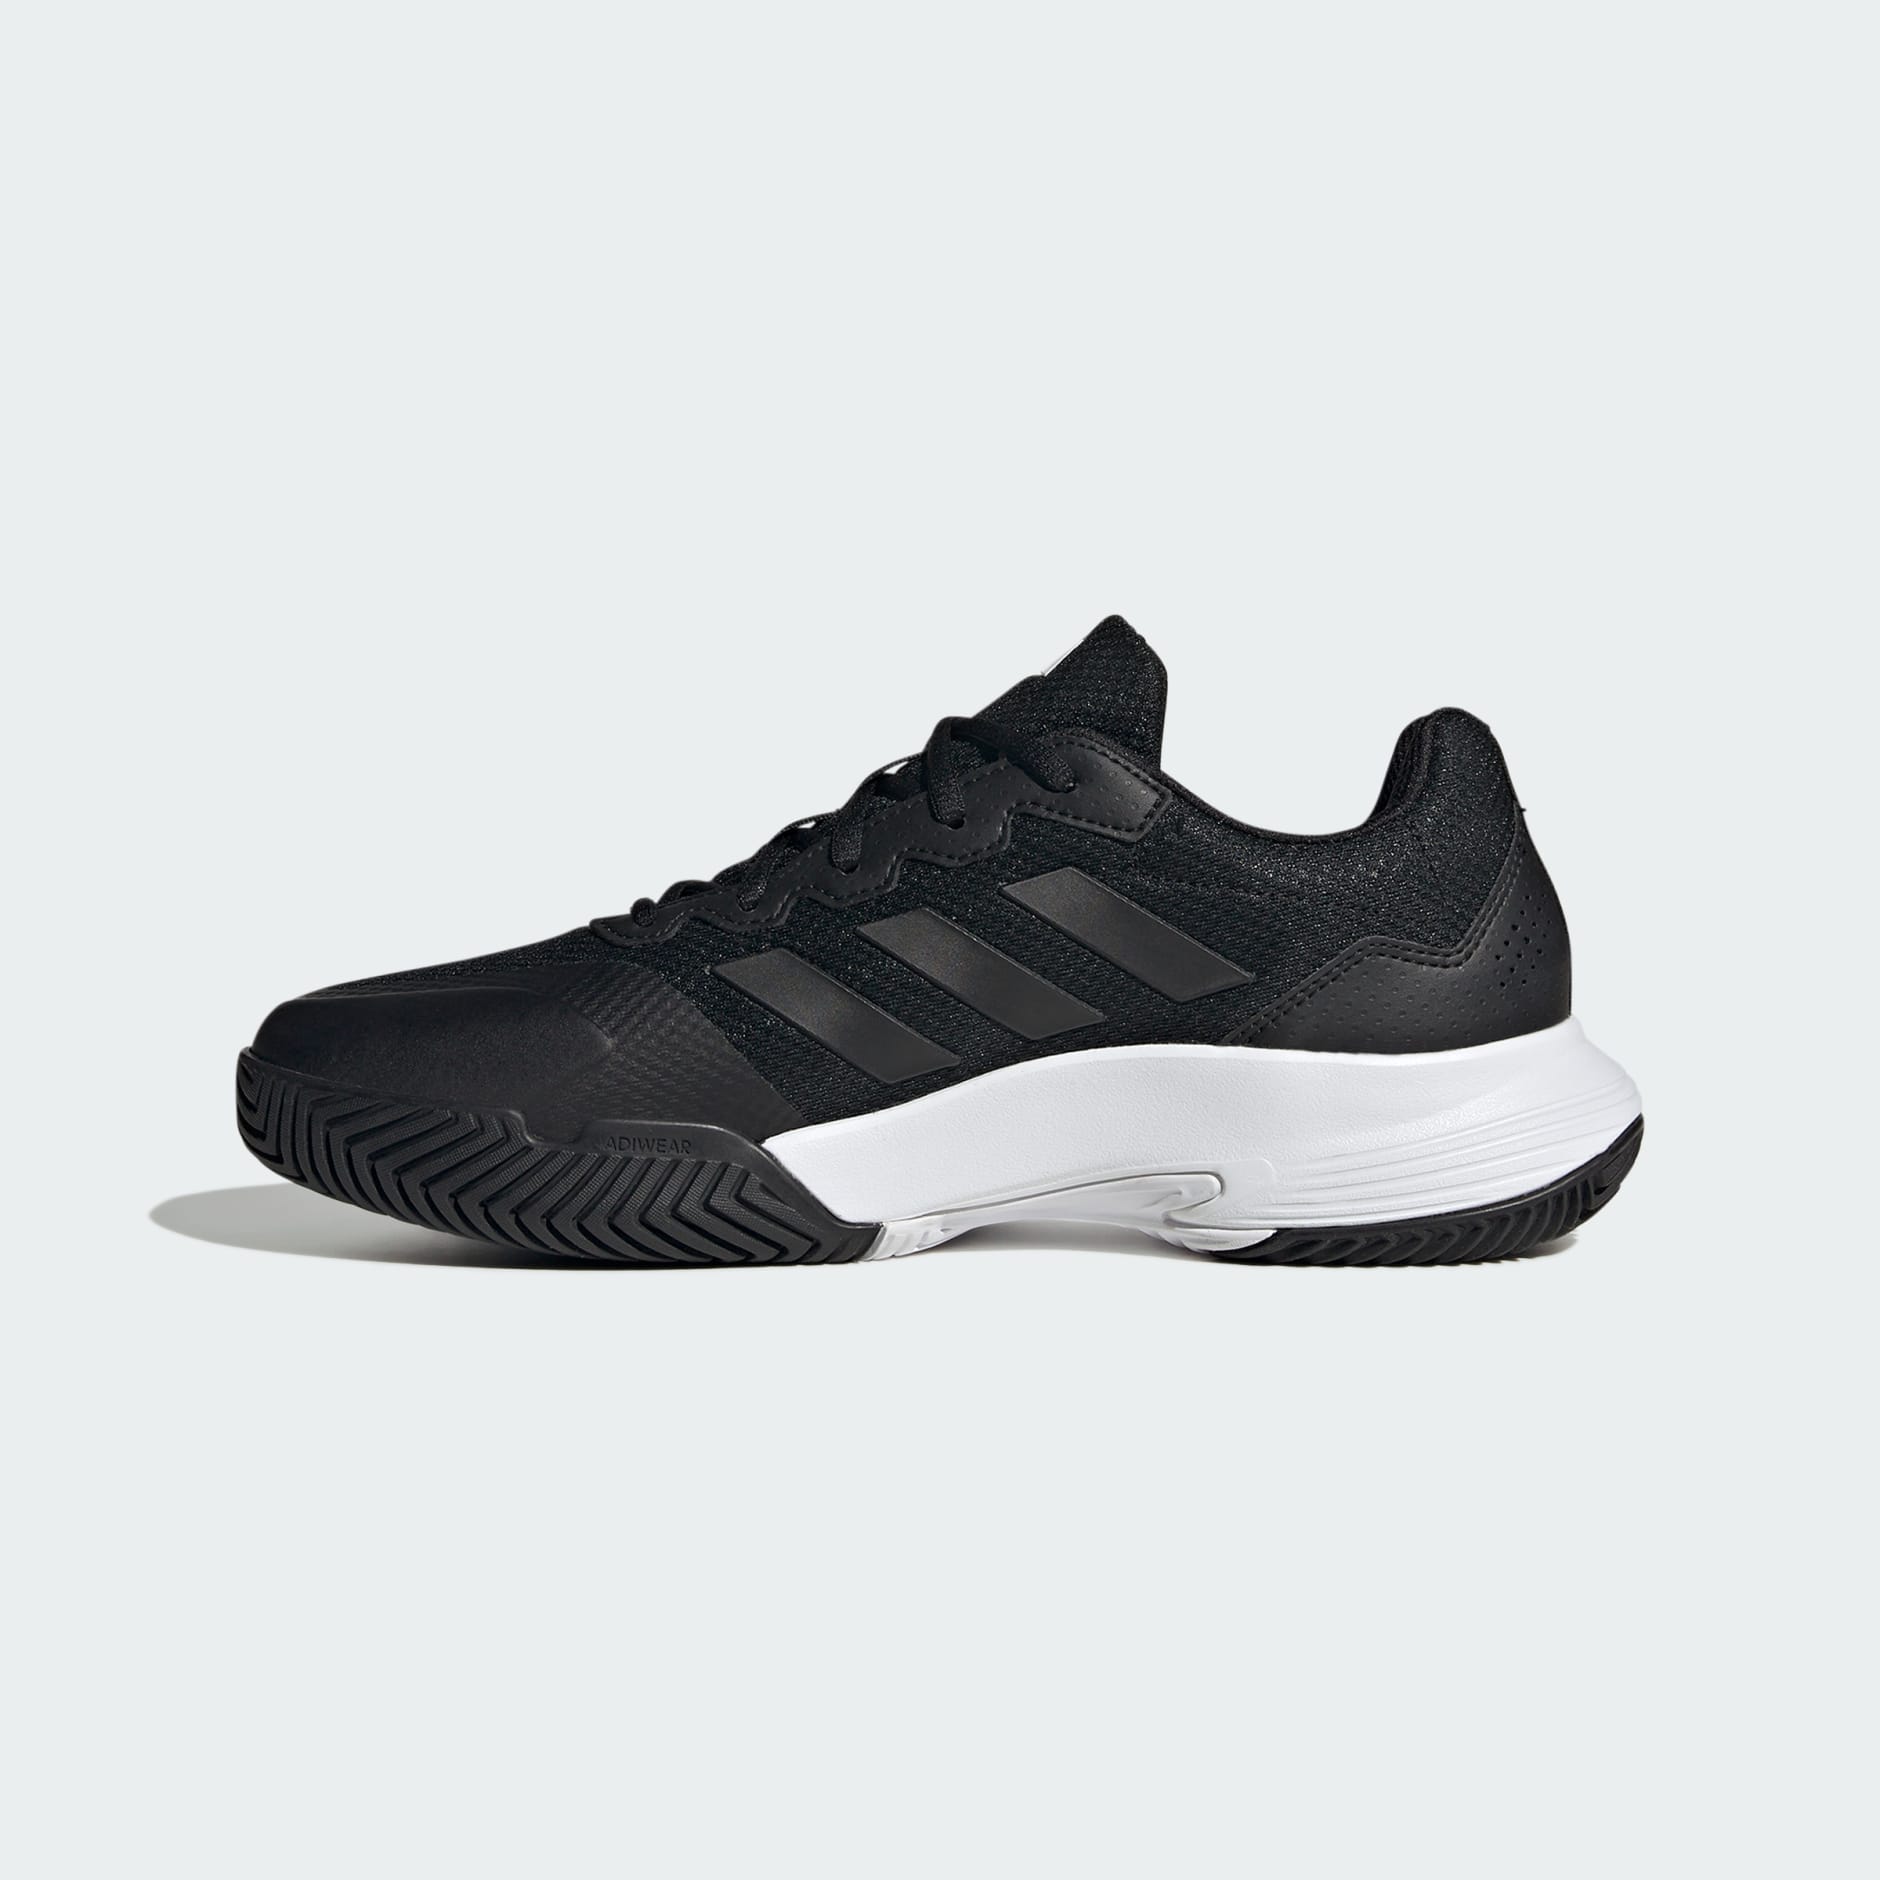 Shoes - Gamecourt 2.0 Tennis Shoes - Black | adidas South Africa